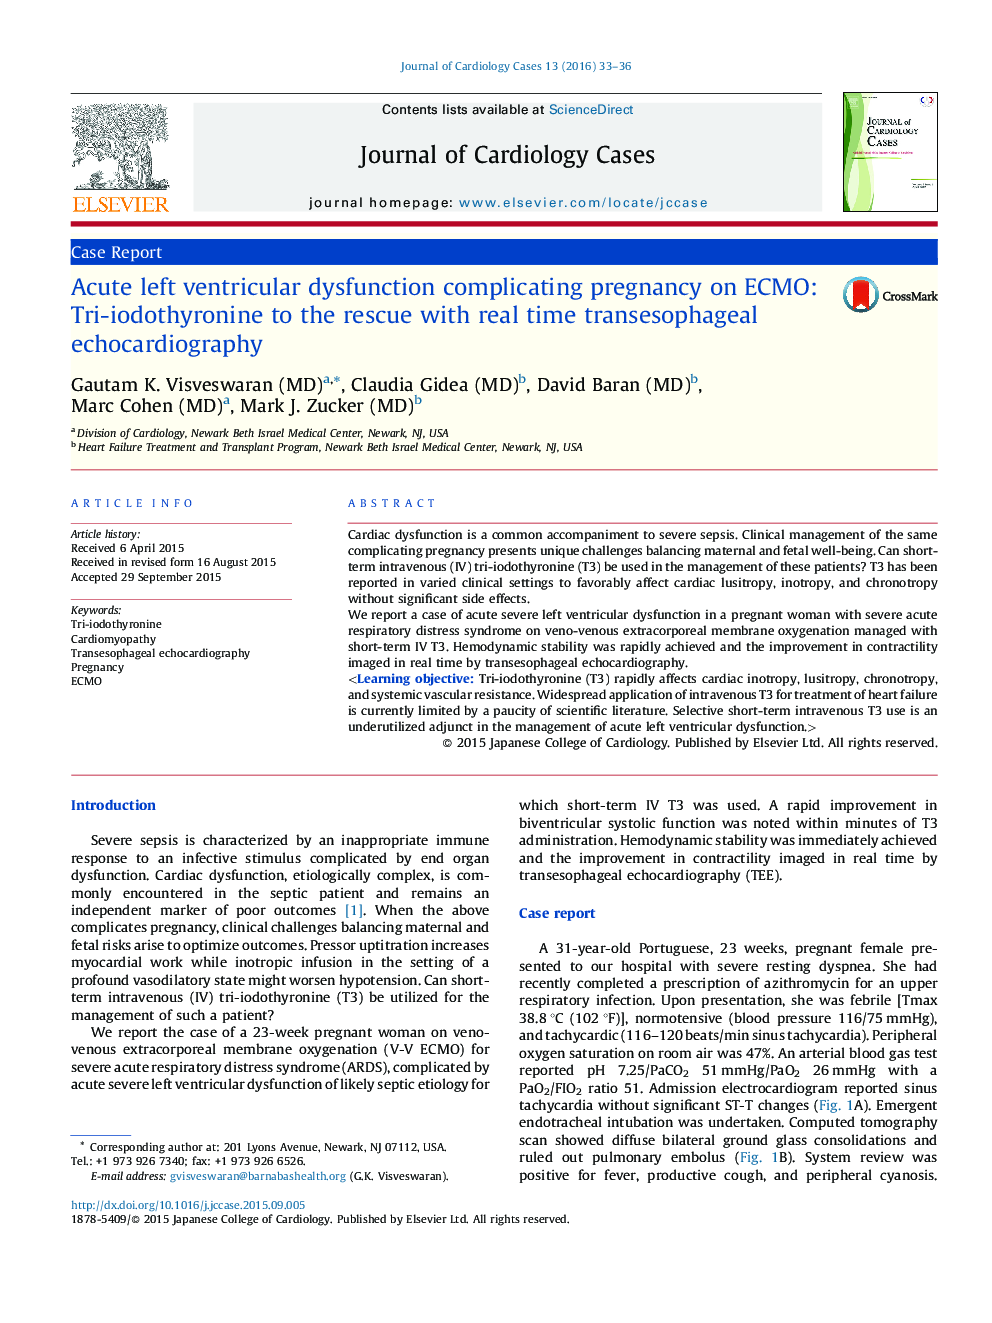 Acute left ventricular dysfunction complicating pregnancy on ECMO: Tri-iodothyronine to the rescue with real time transesophageal echocardiography